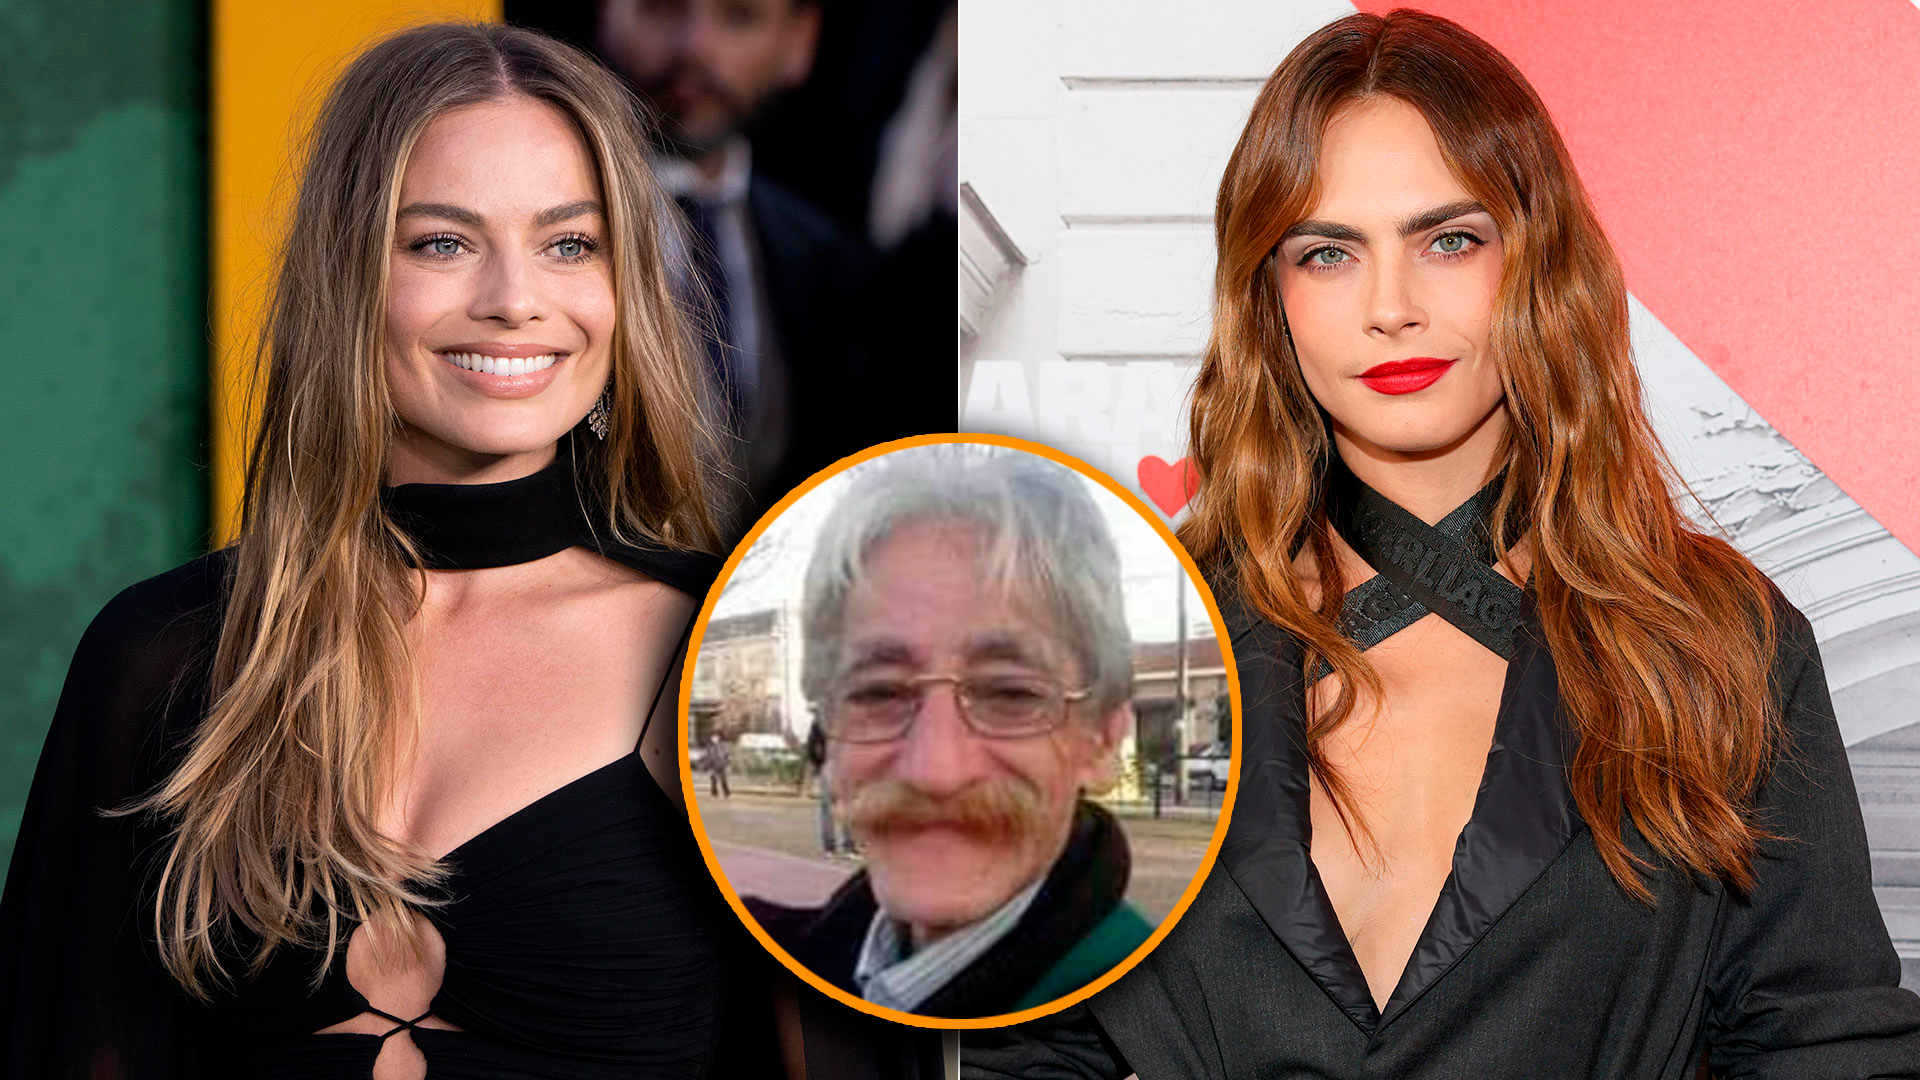 Carlos Benítez, the taxi driver who saw how Margot Robbie and Cara Delevingne's friends beat the photographer in La Boca